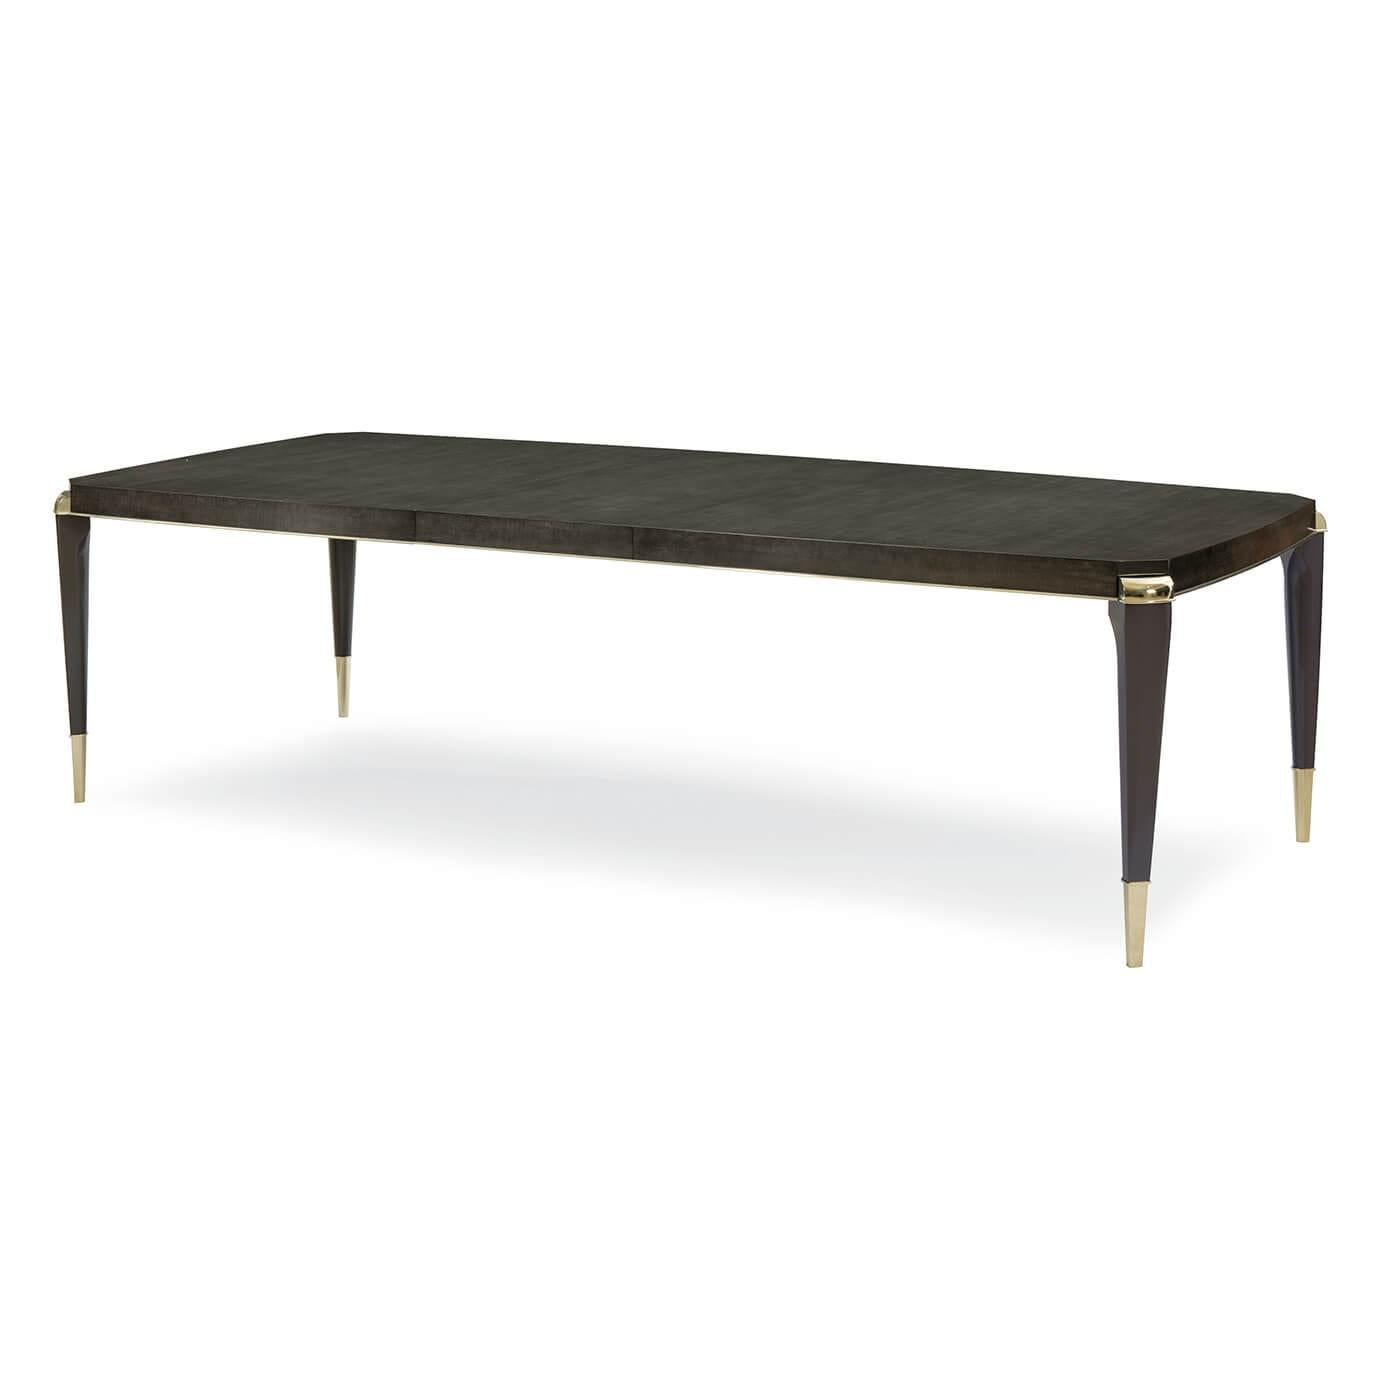 An Art Deco-style extension dining table that is perfect for intimate dinner parties or large family gatherings. This beautiful table is crafted with charcoal anegre. Its delicate finely figured wood compliments its bowed rectangular shape with